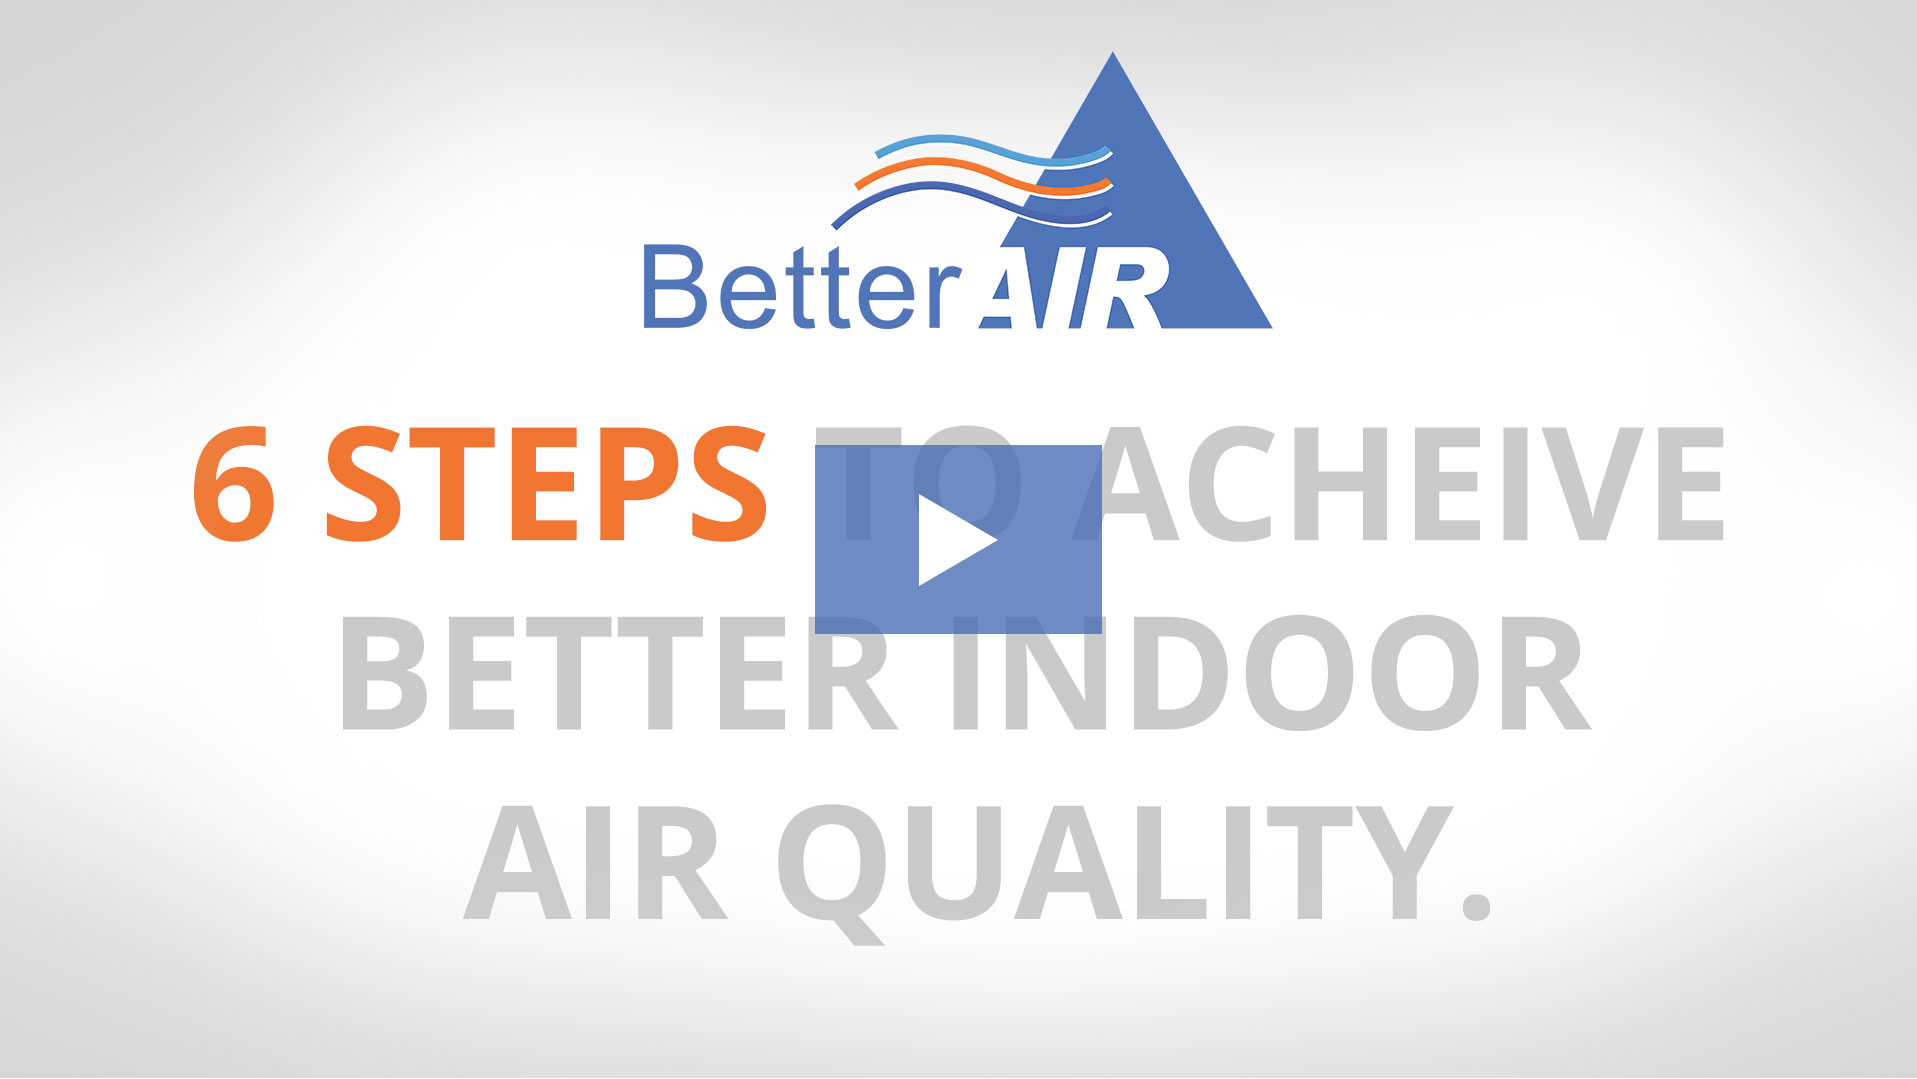 Video: Better Air’s 6 step process for a cleaner and more efficient home HVAC system.